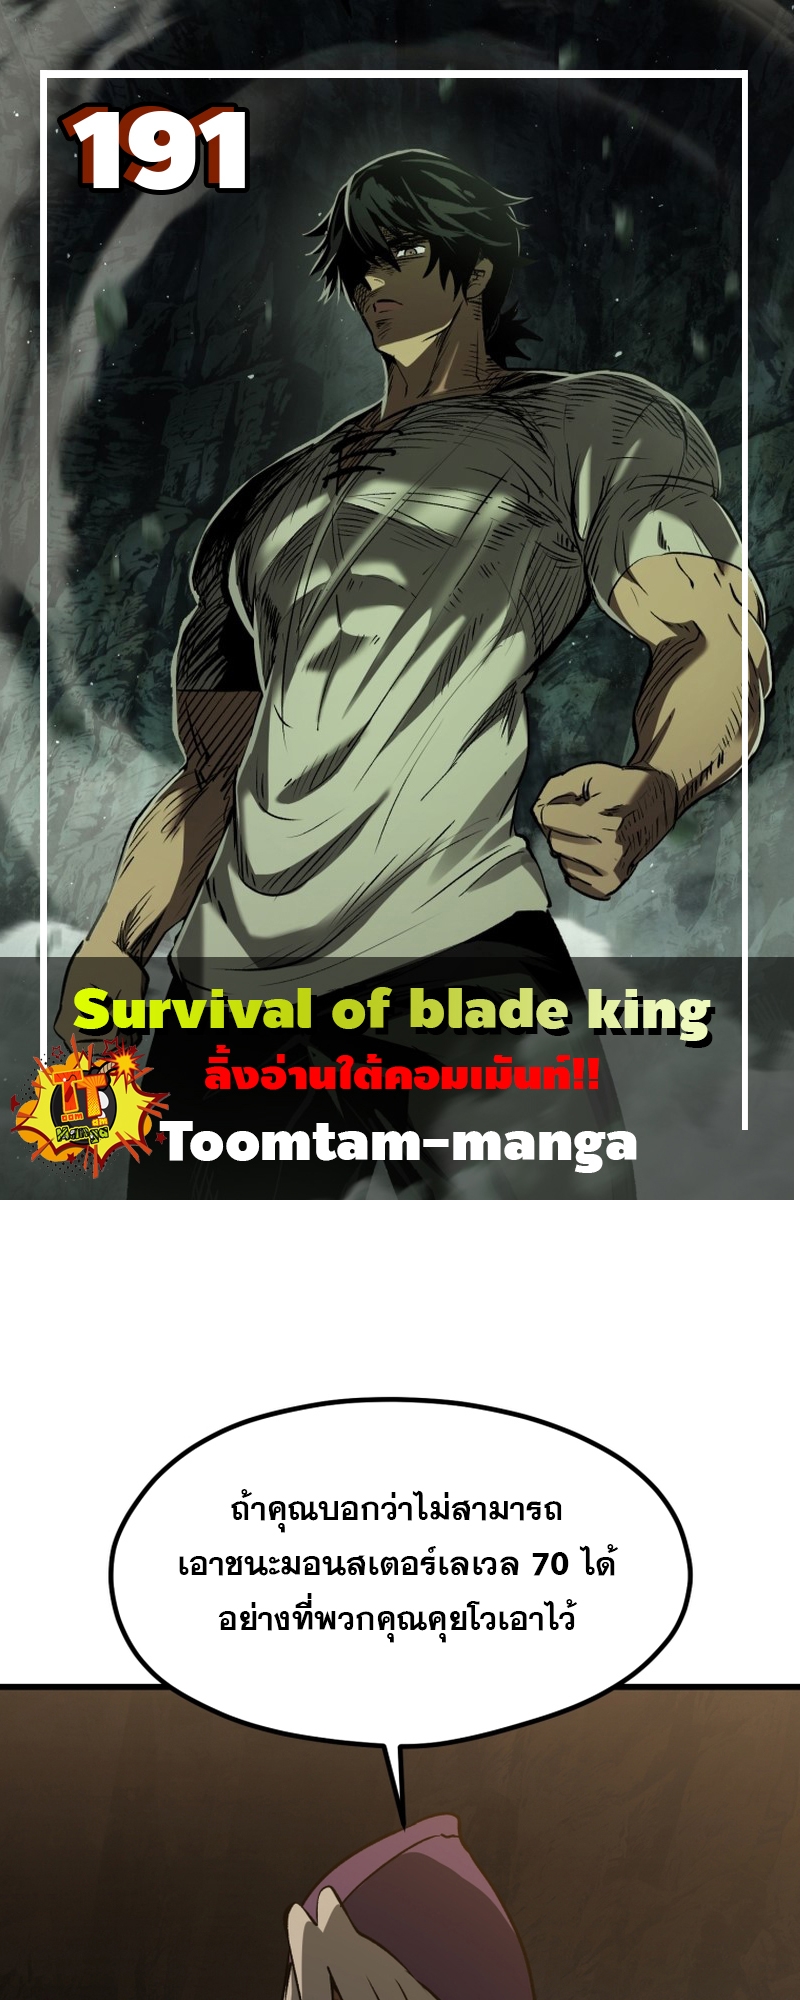 Survival of blade king 191 10 2 25670001